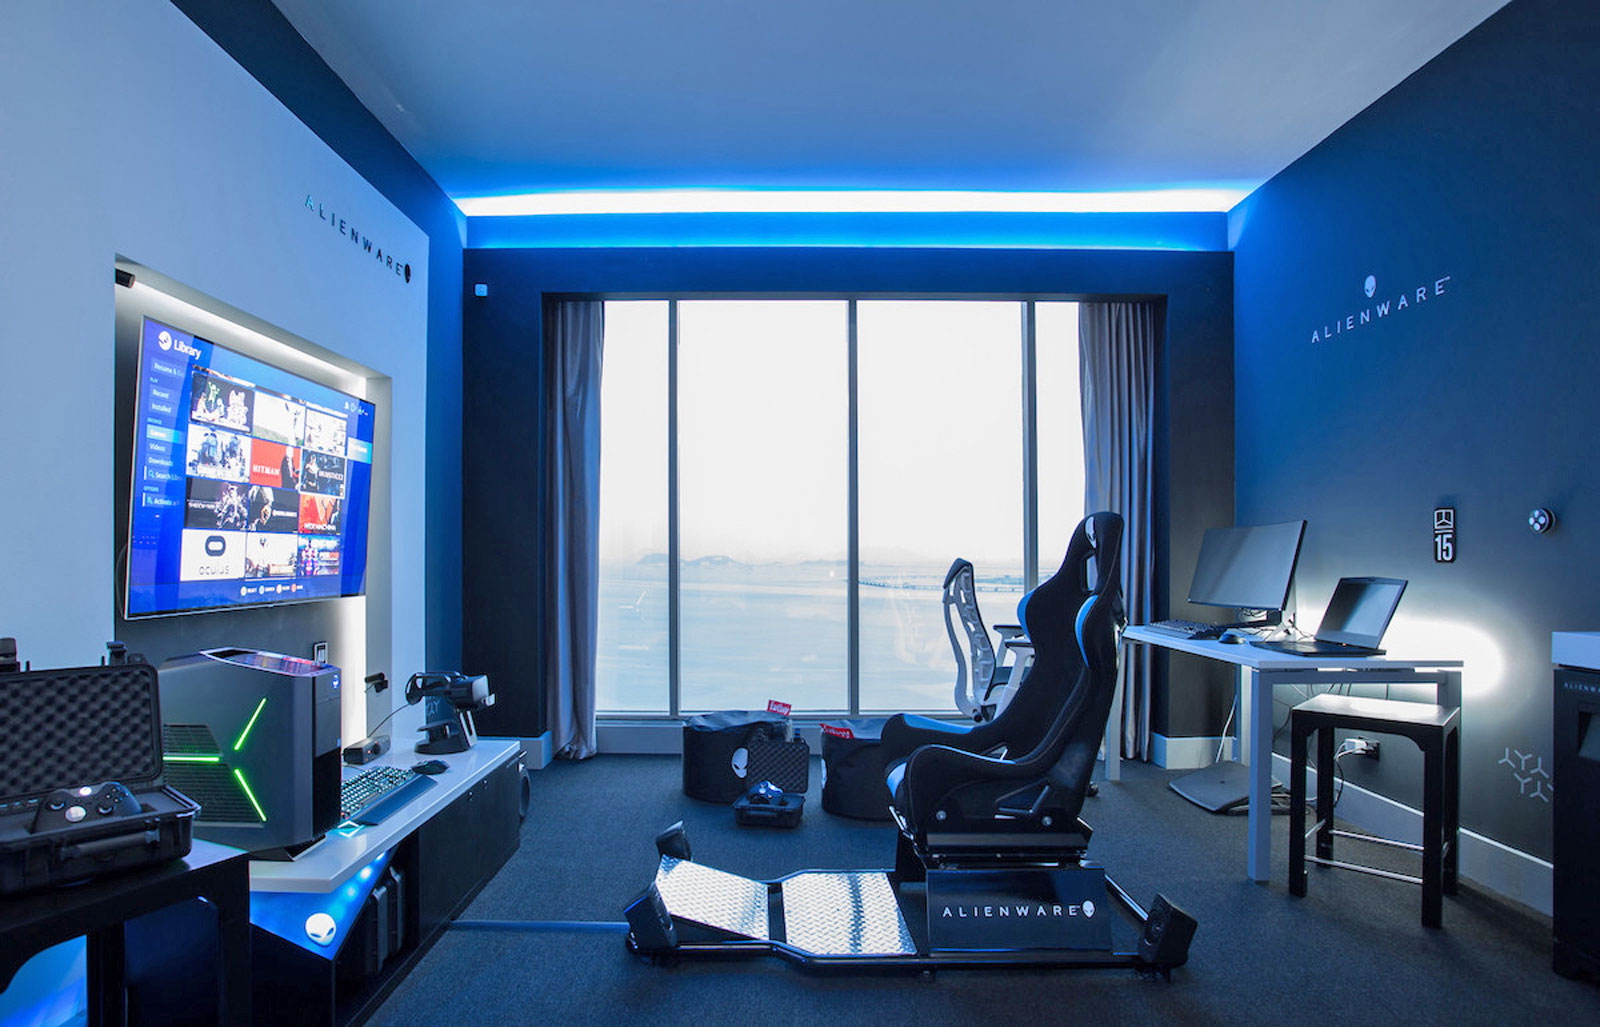  Alienware creates the perfect hotel room for gamers - NotebookCheck.net 